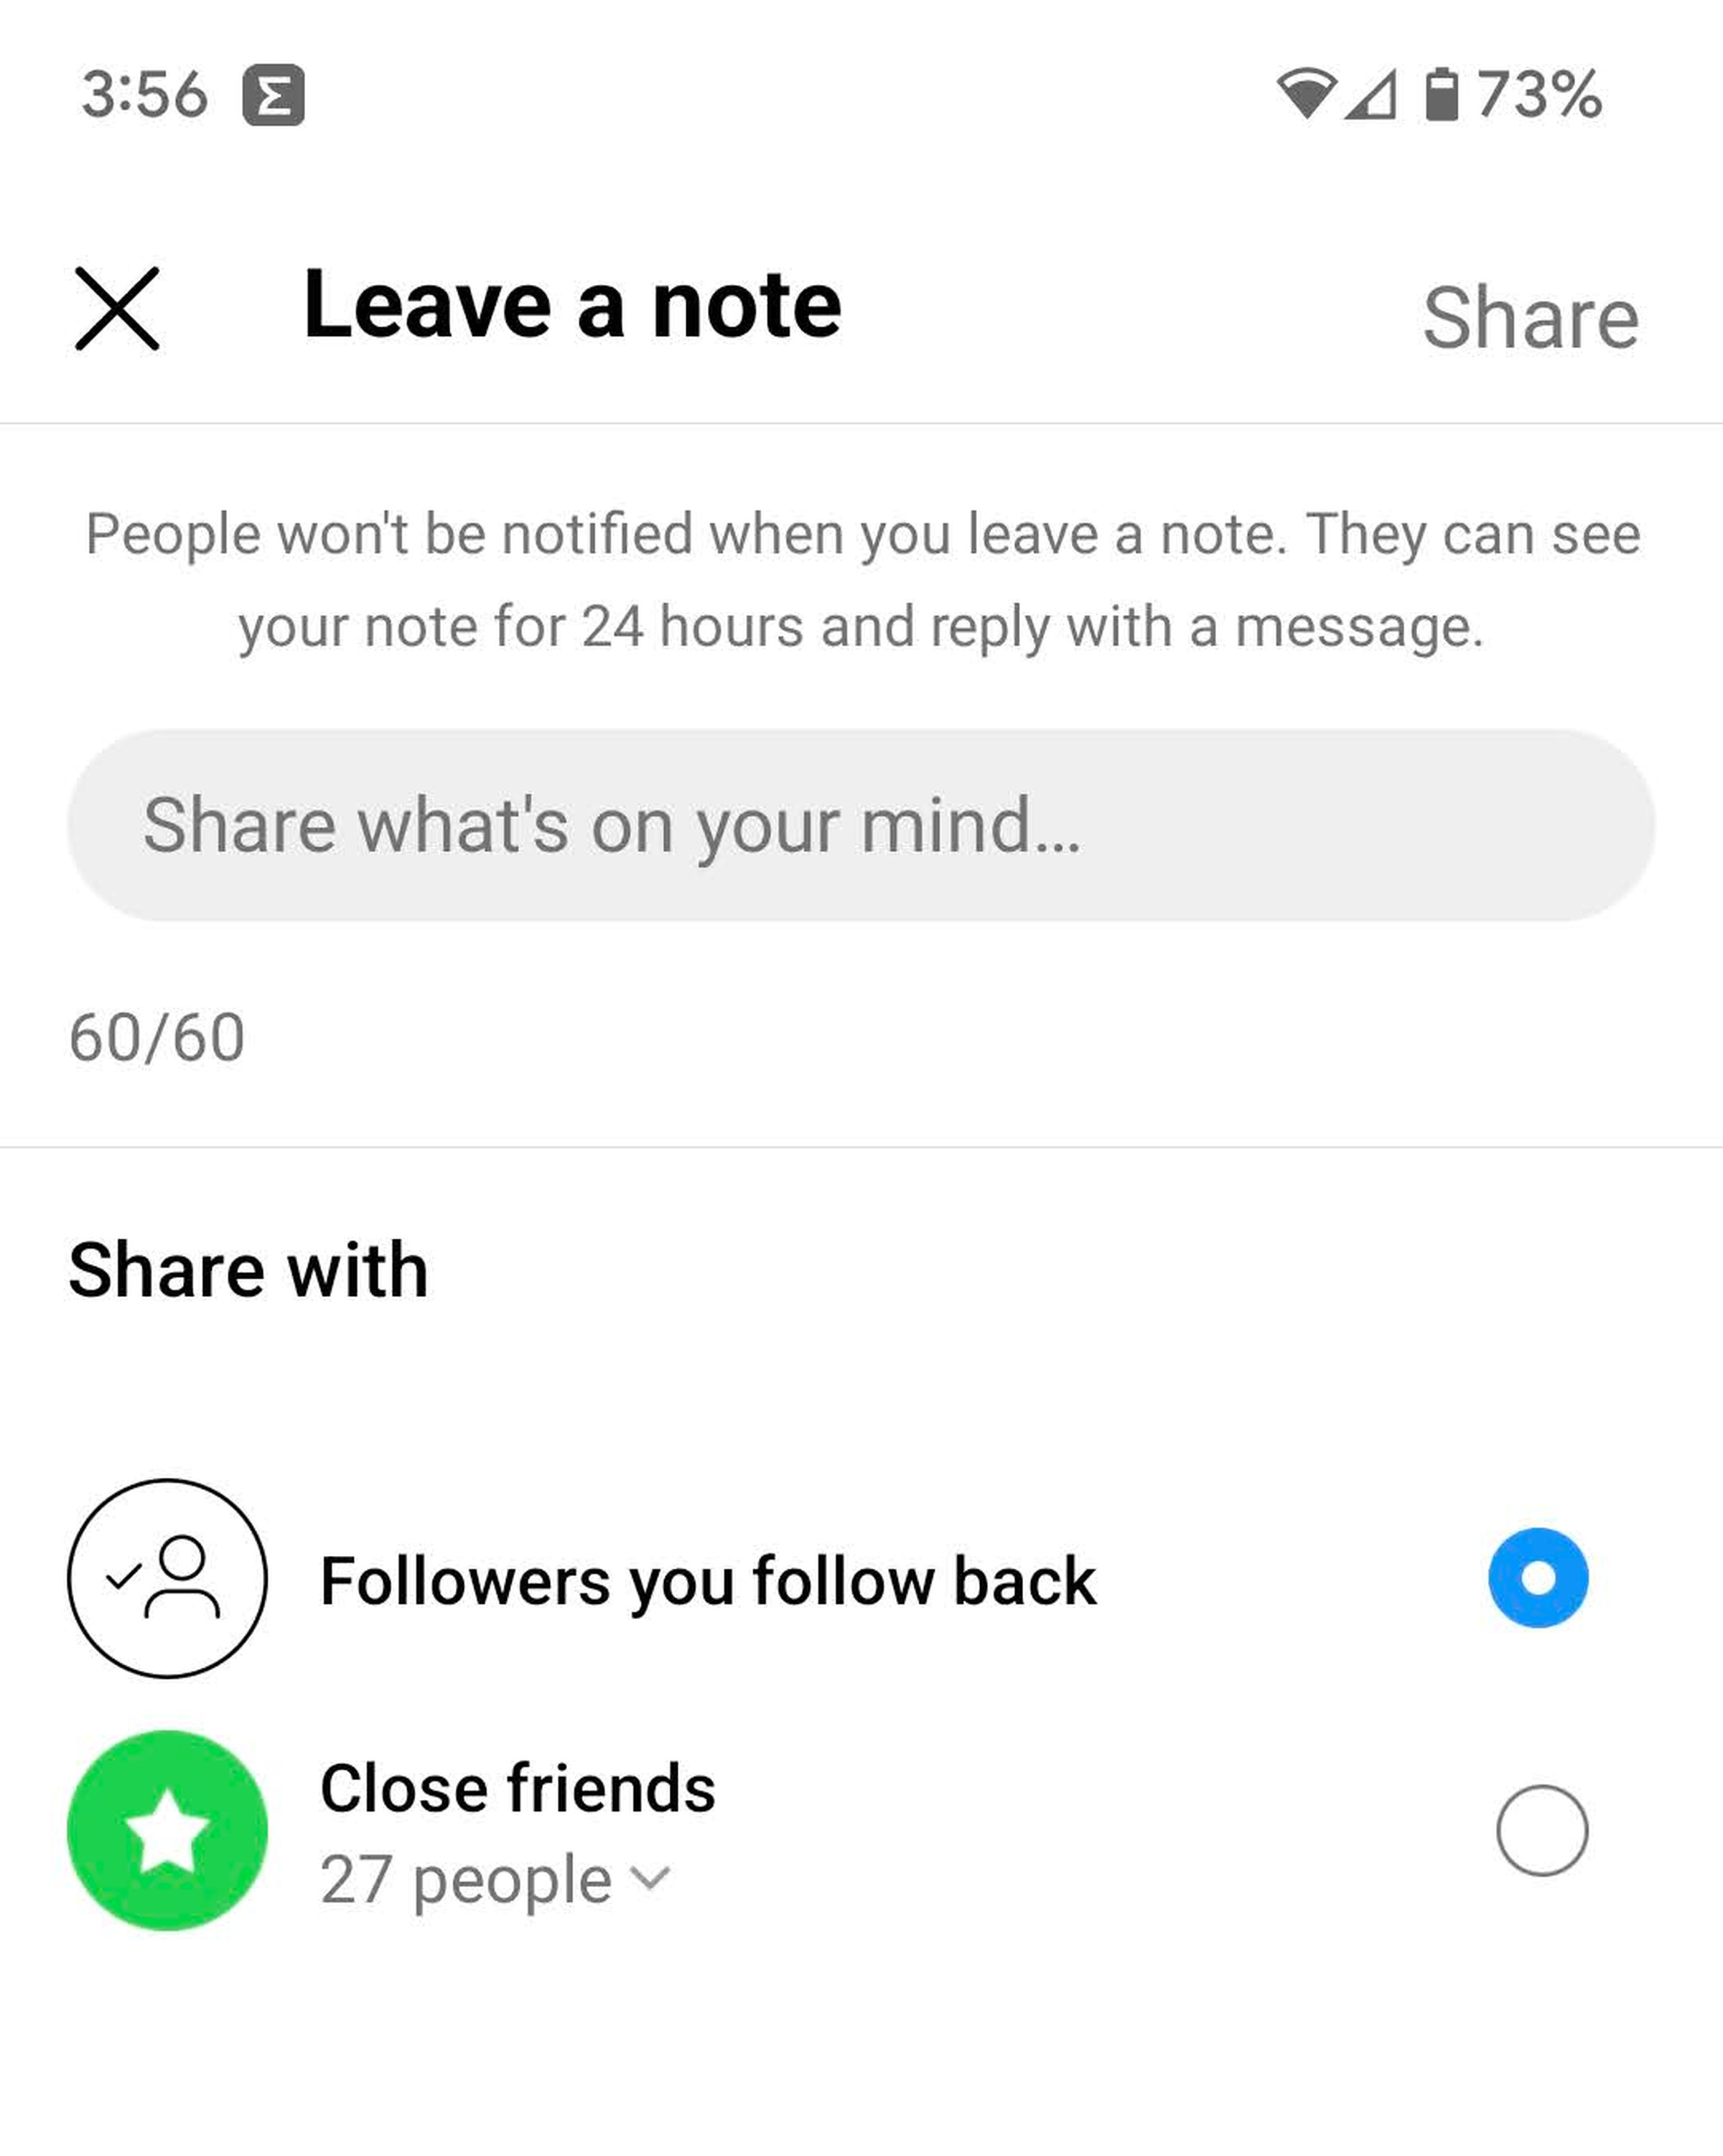 Page titled “Leave a note” with a space labeled “Share what’s on your mind” and two Share with lines.